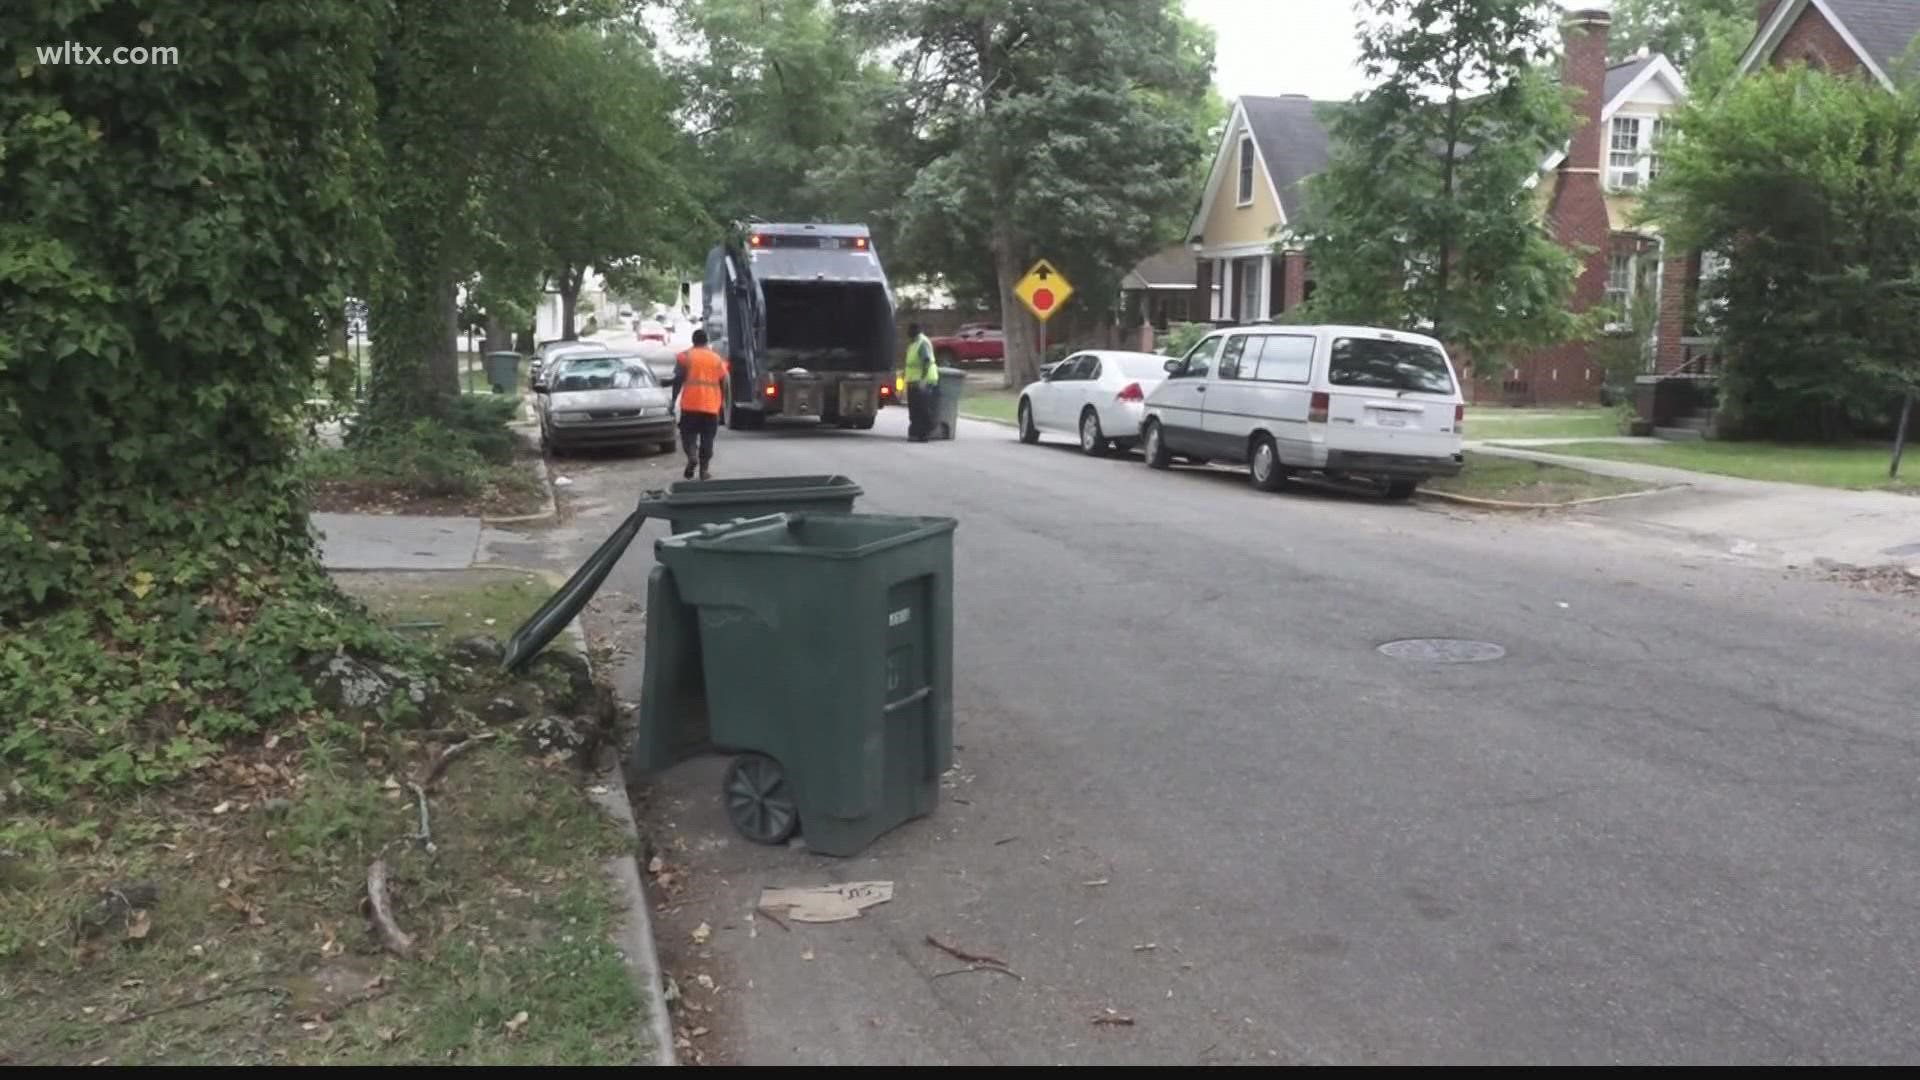 Yard trash will continue to be picked up by subcontractors. However, residents should still expect delays.